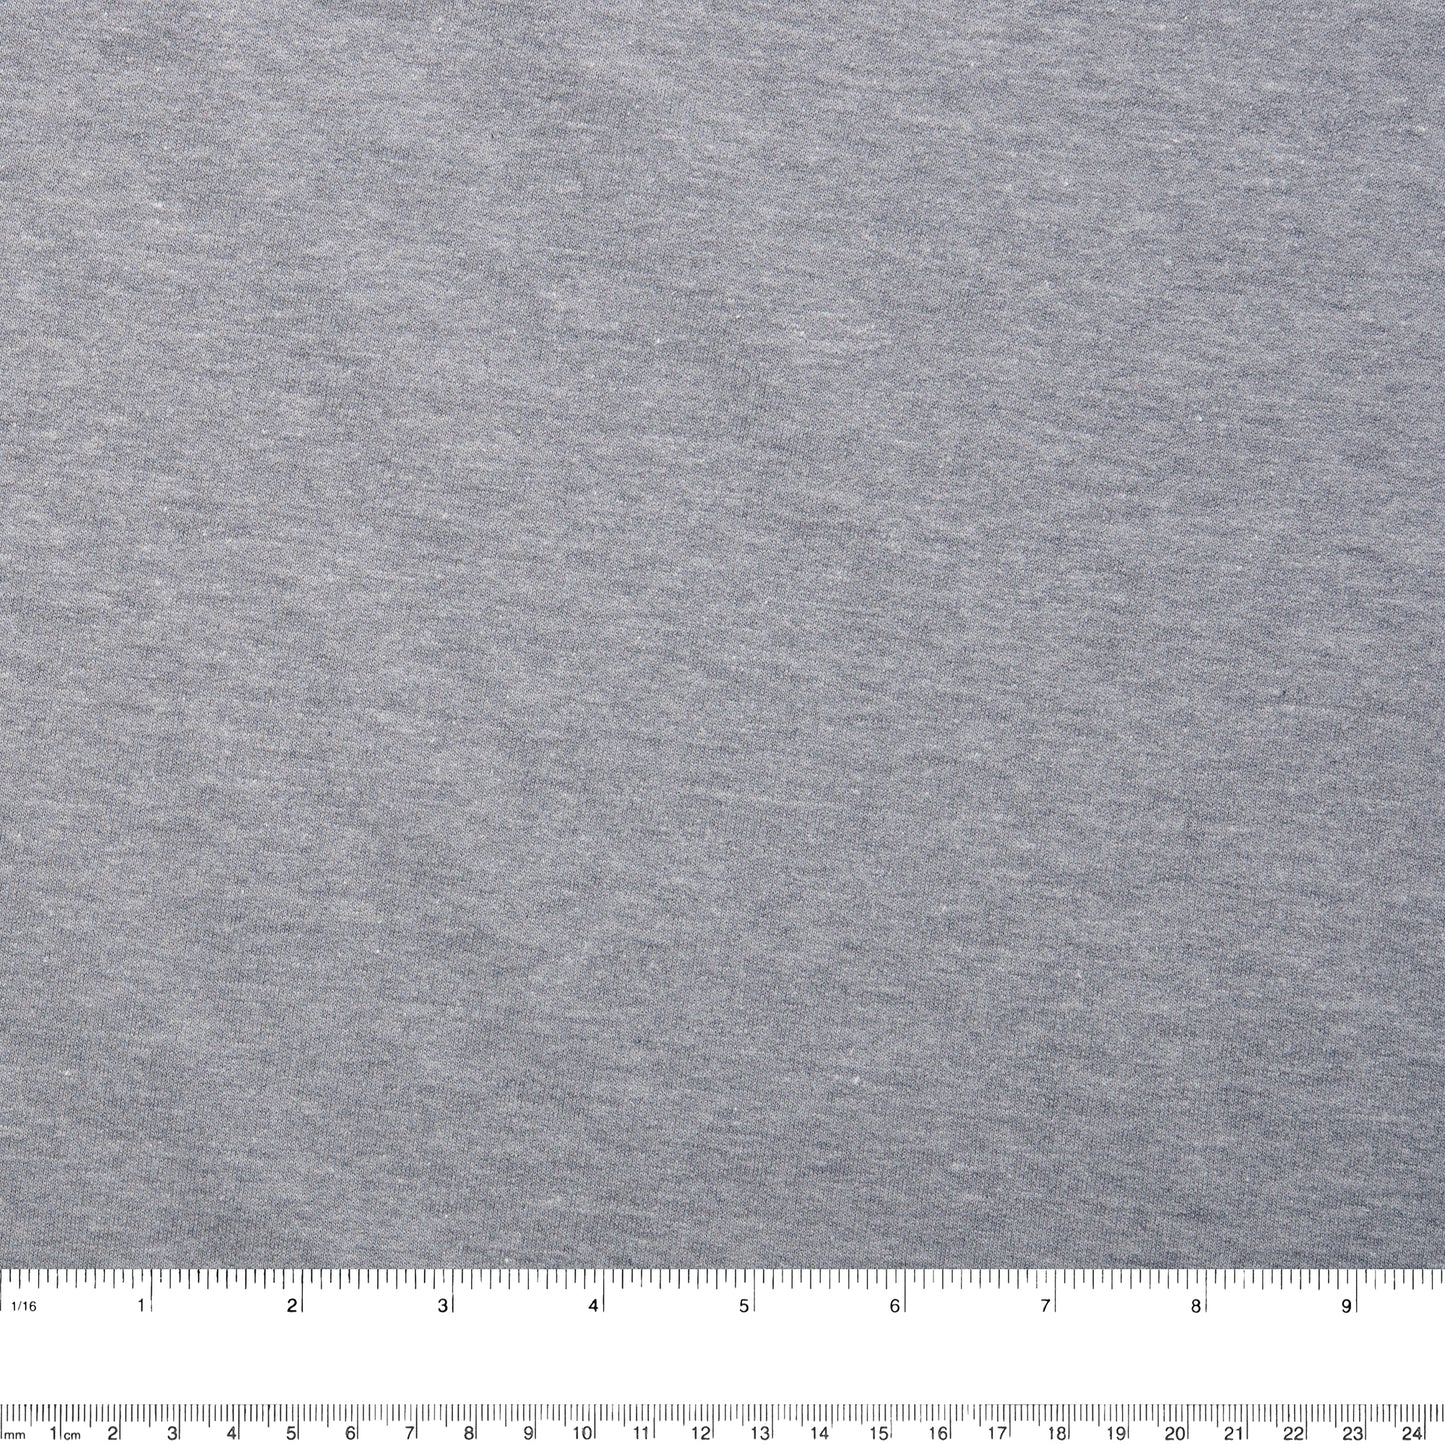 French terry - Canadian - Pale mixed gray